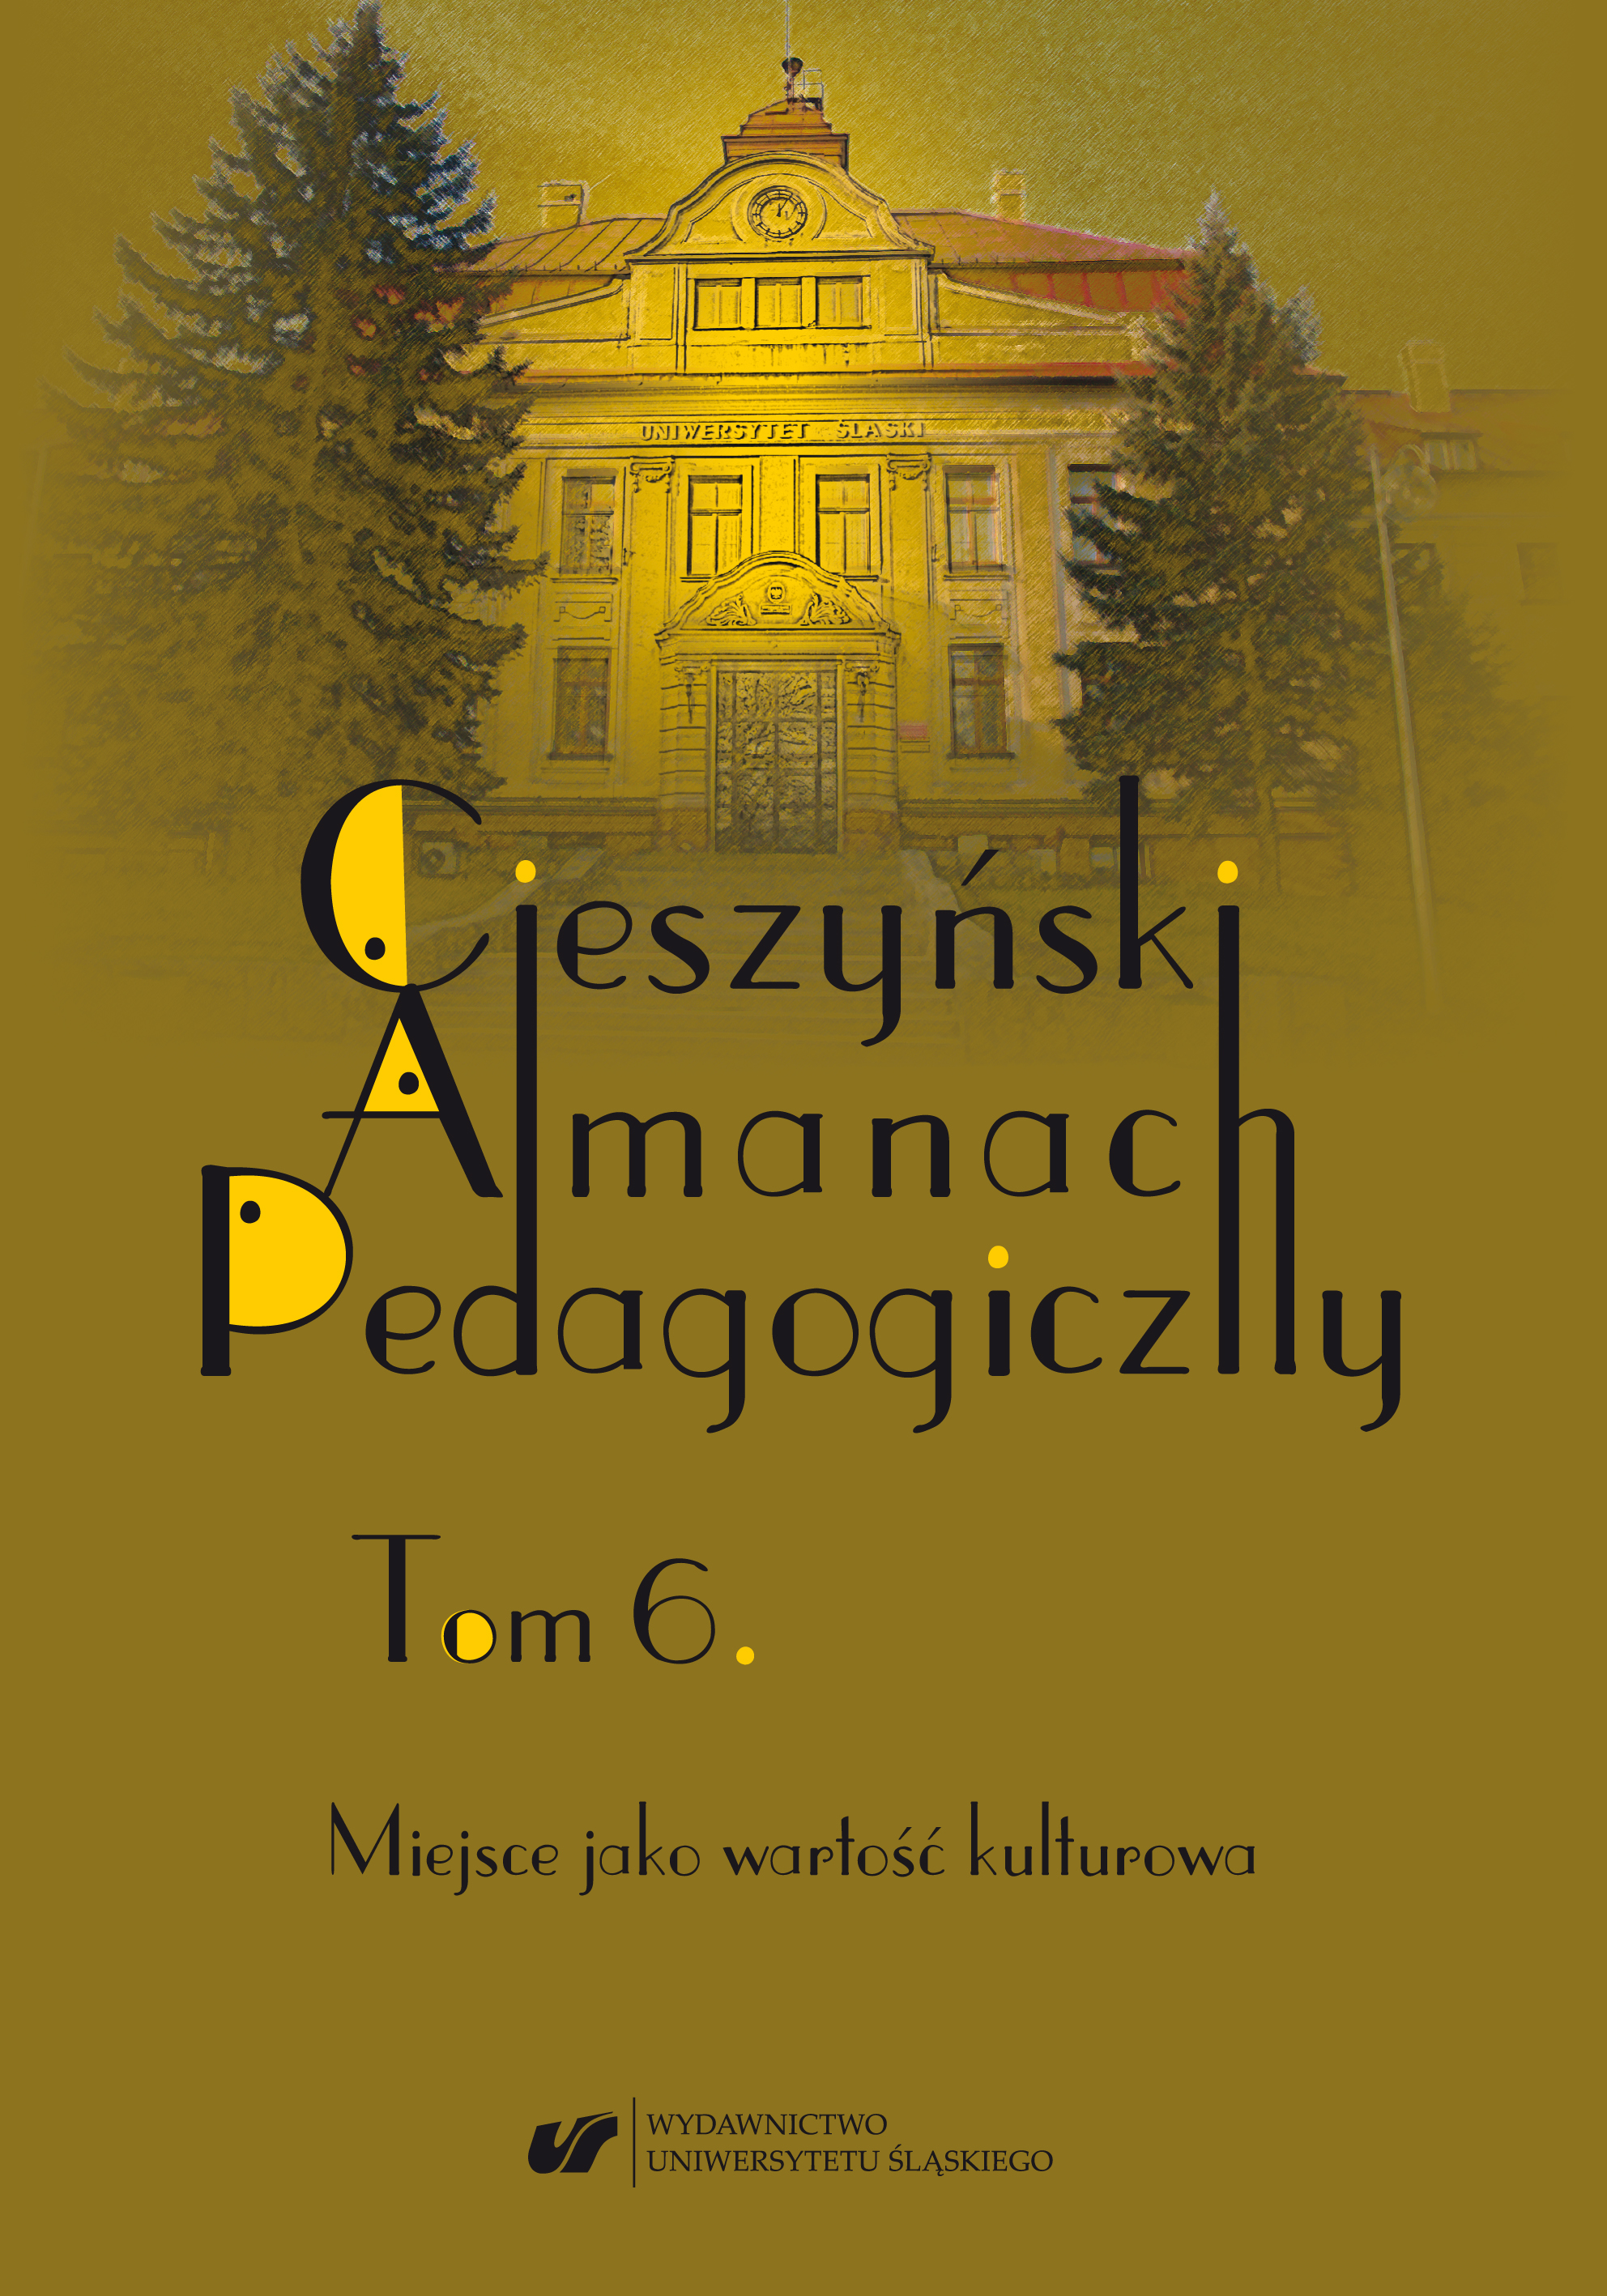 Luke the Evangelist Hospice in Cieszyn as a promoter of activities Cover Image